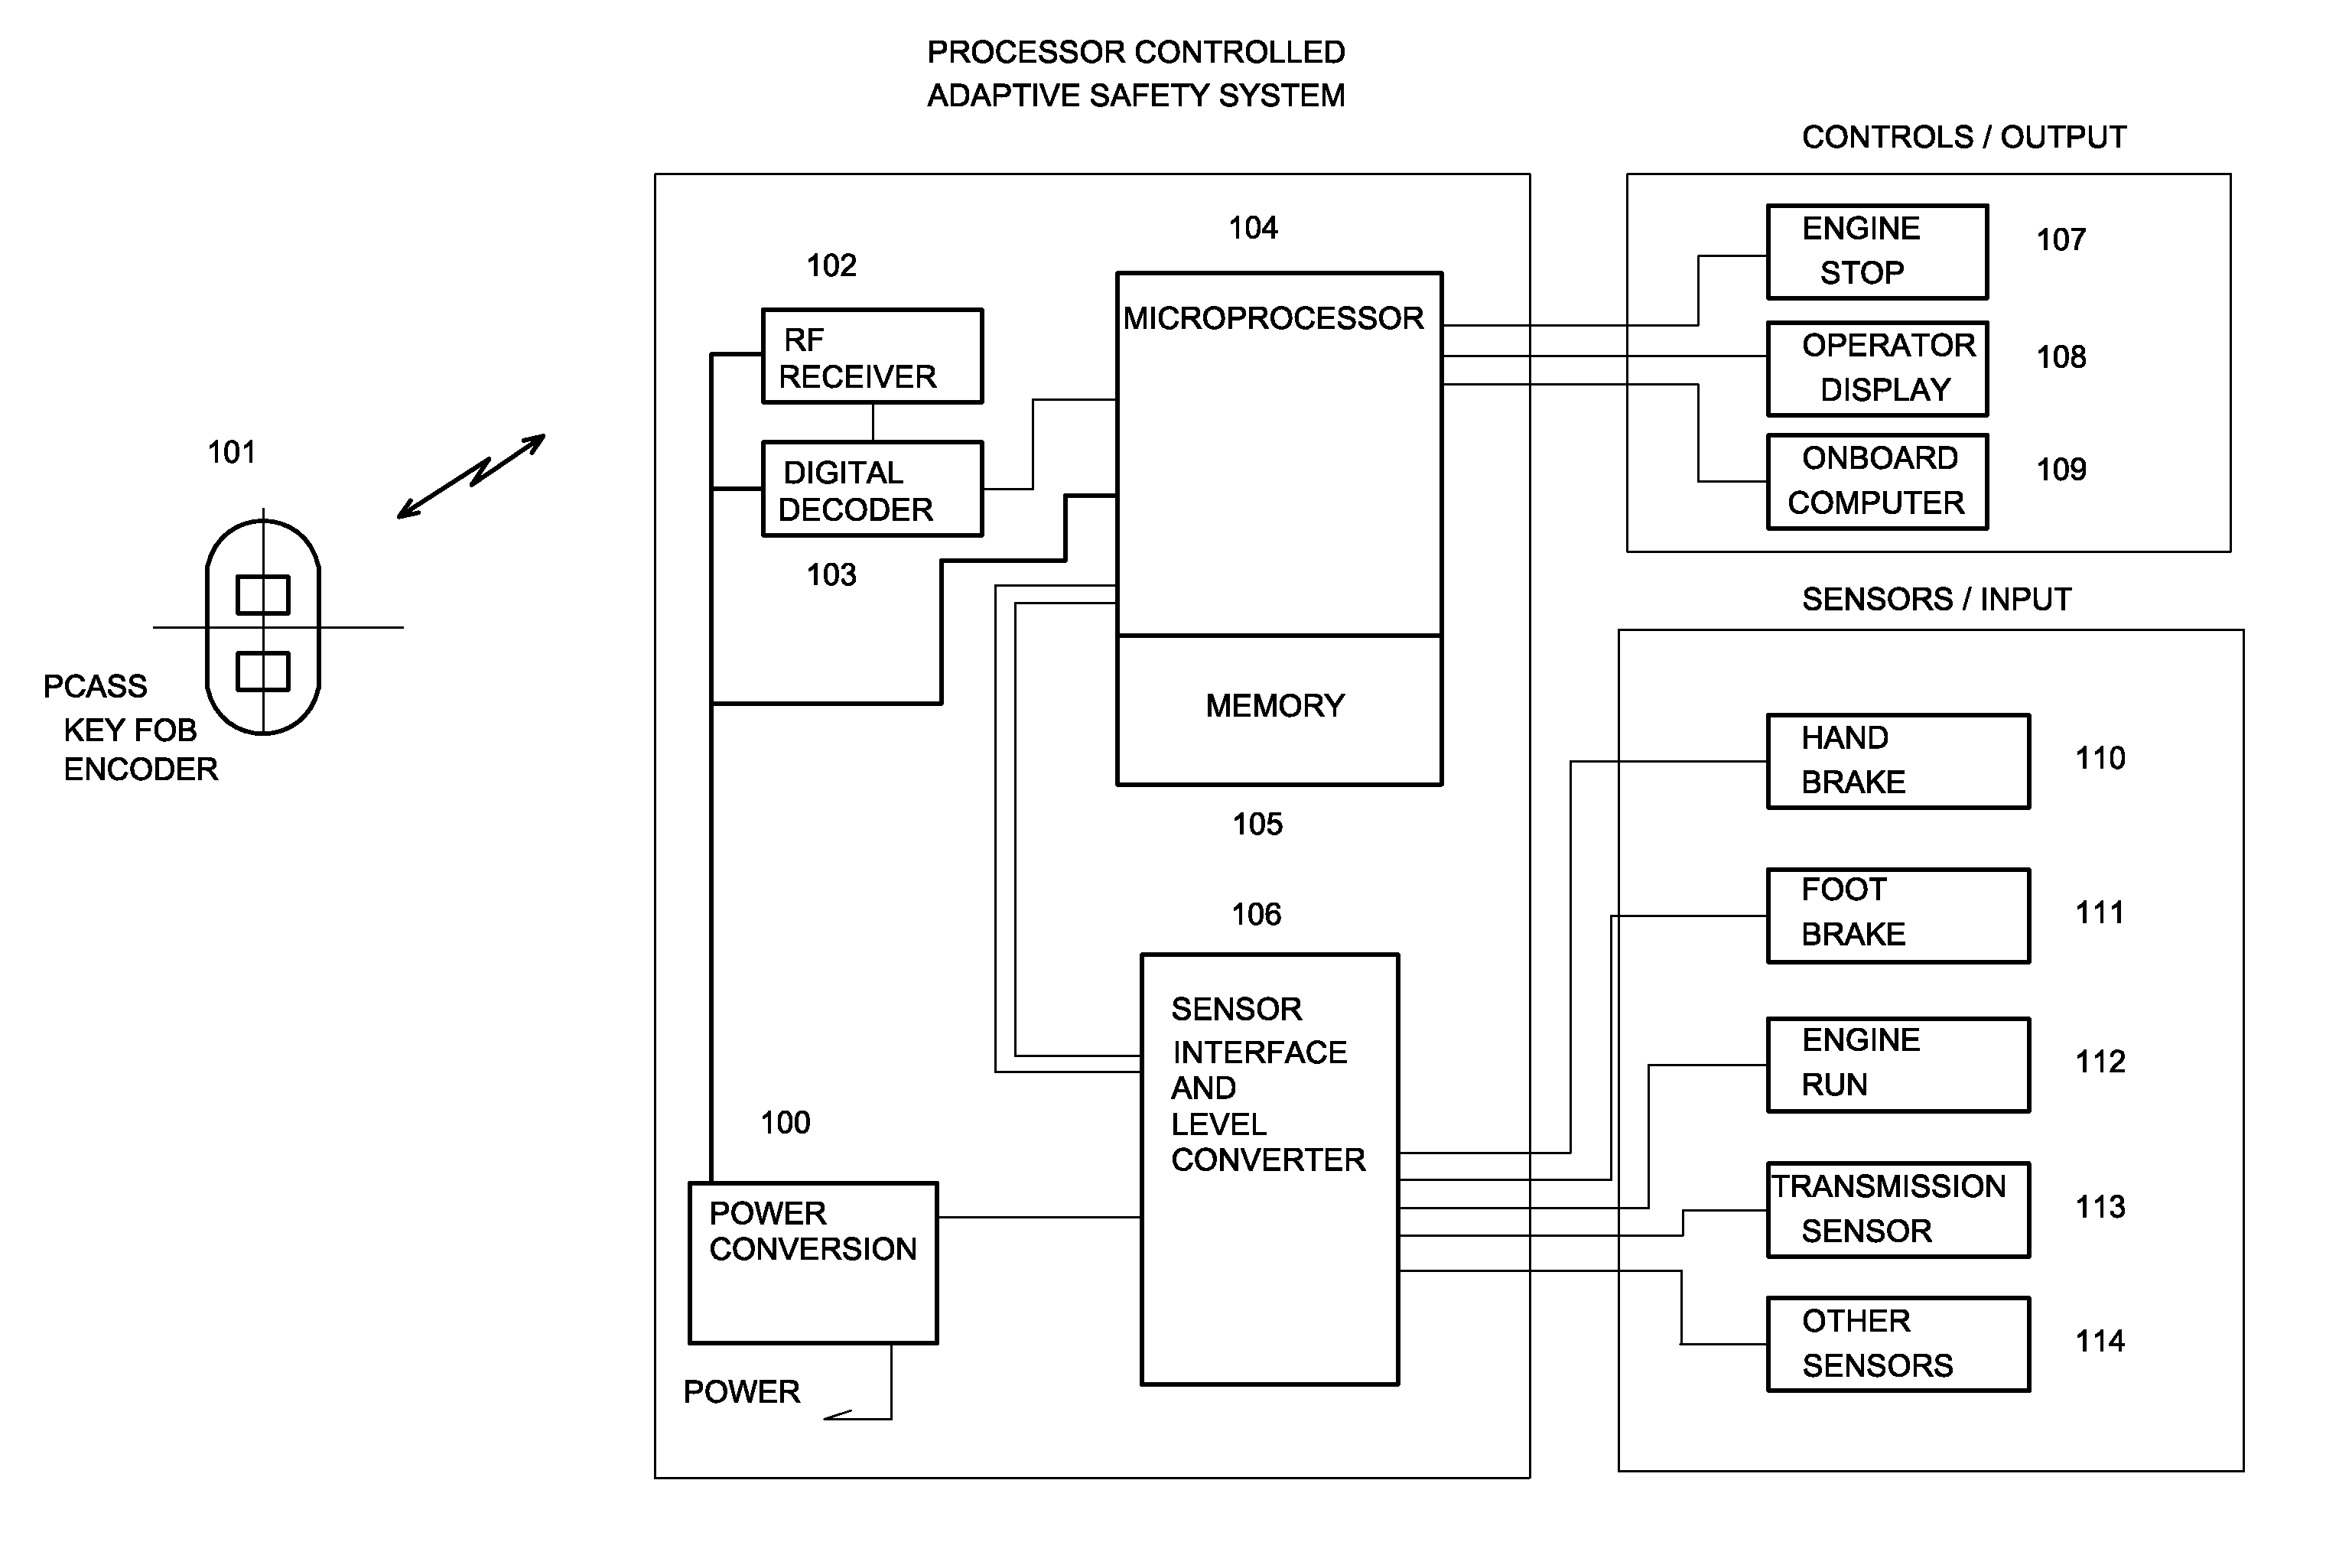 Processor Controlled Adaptive Safety System with Remote Shutdown